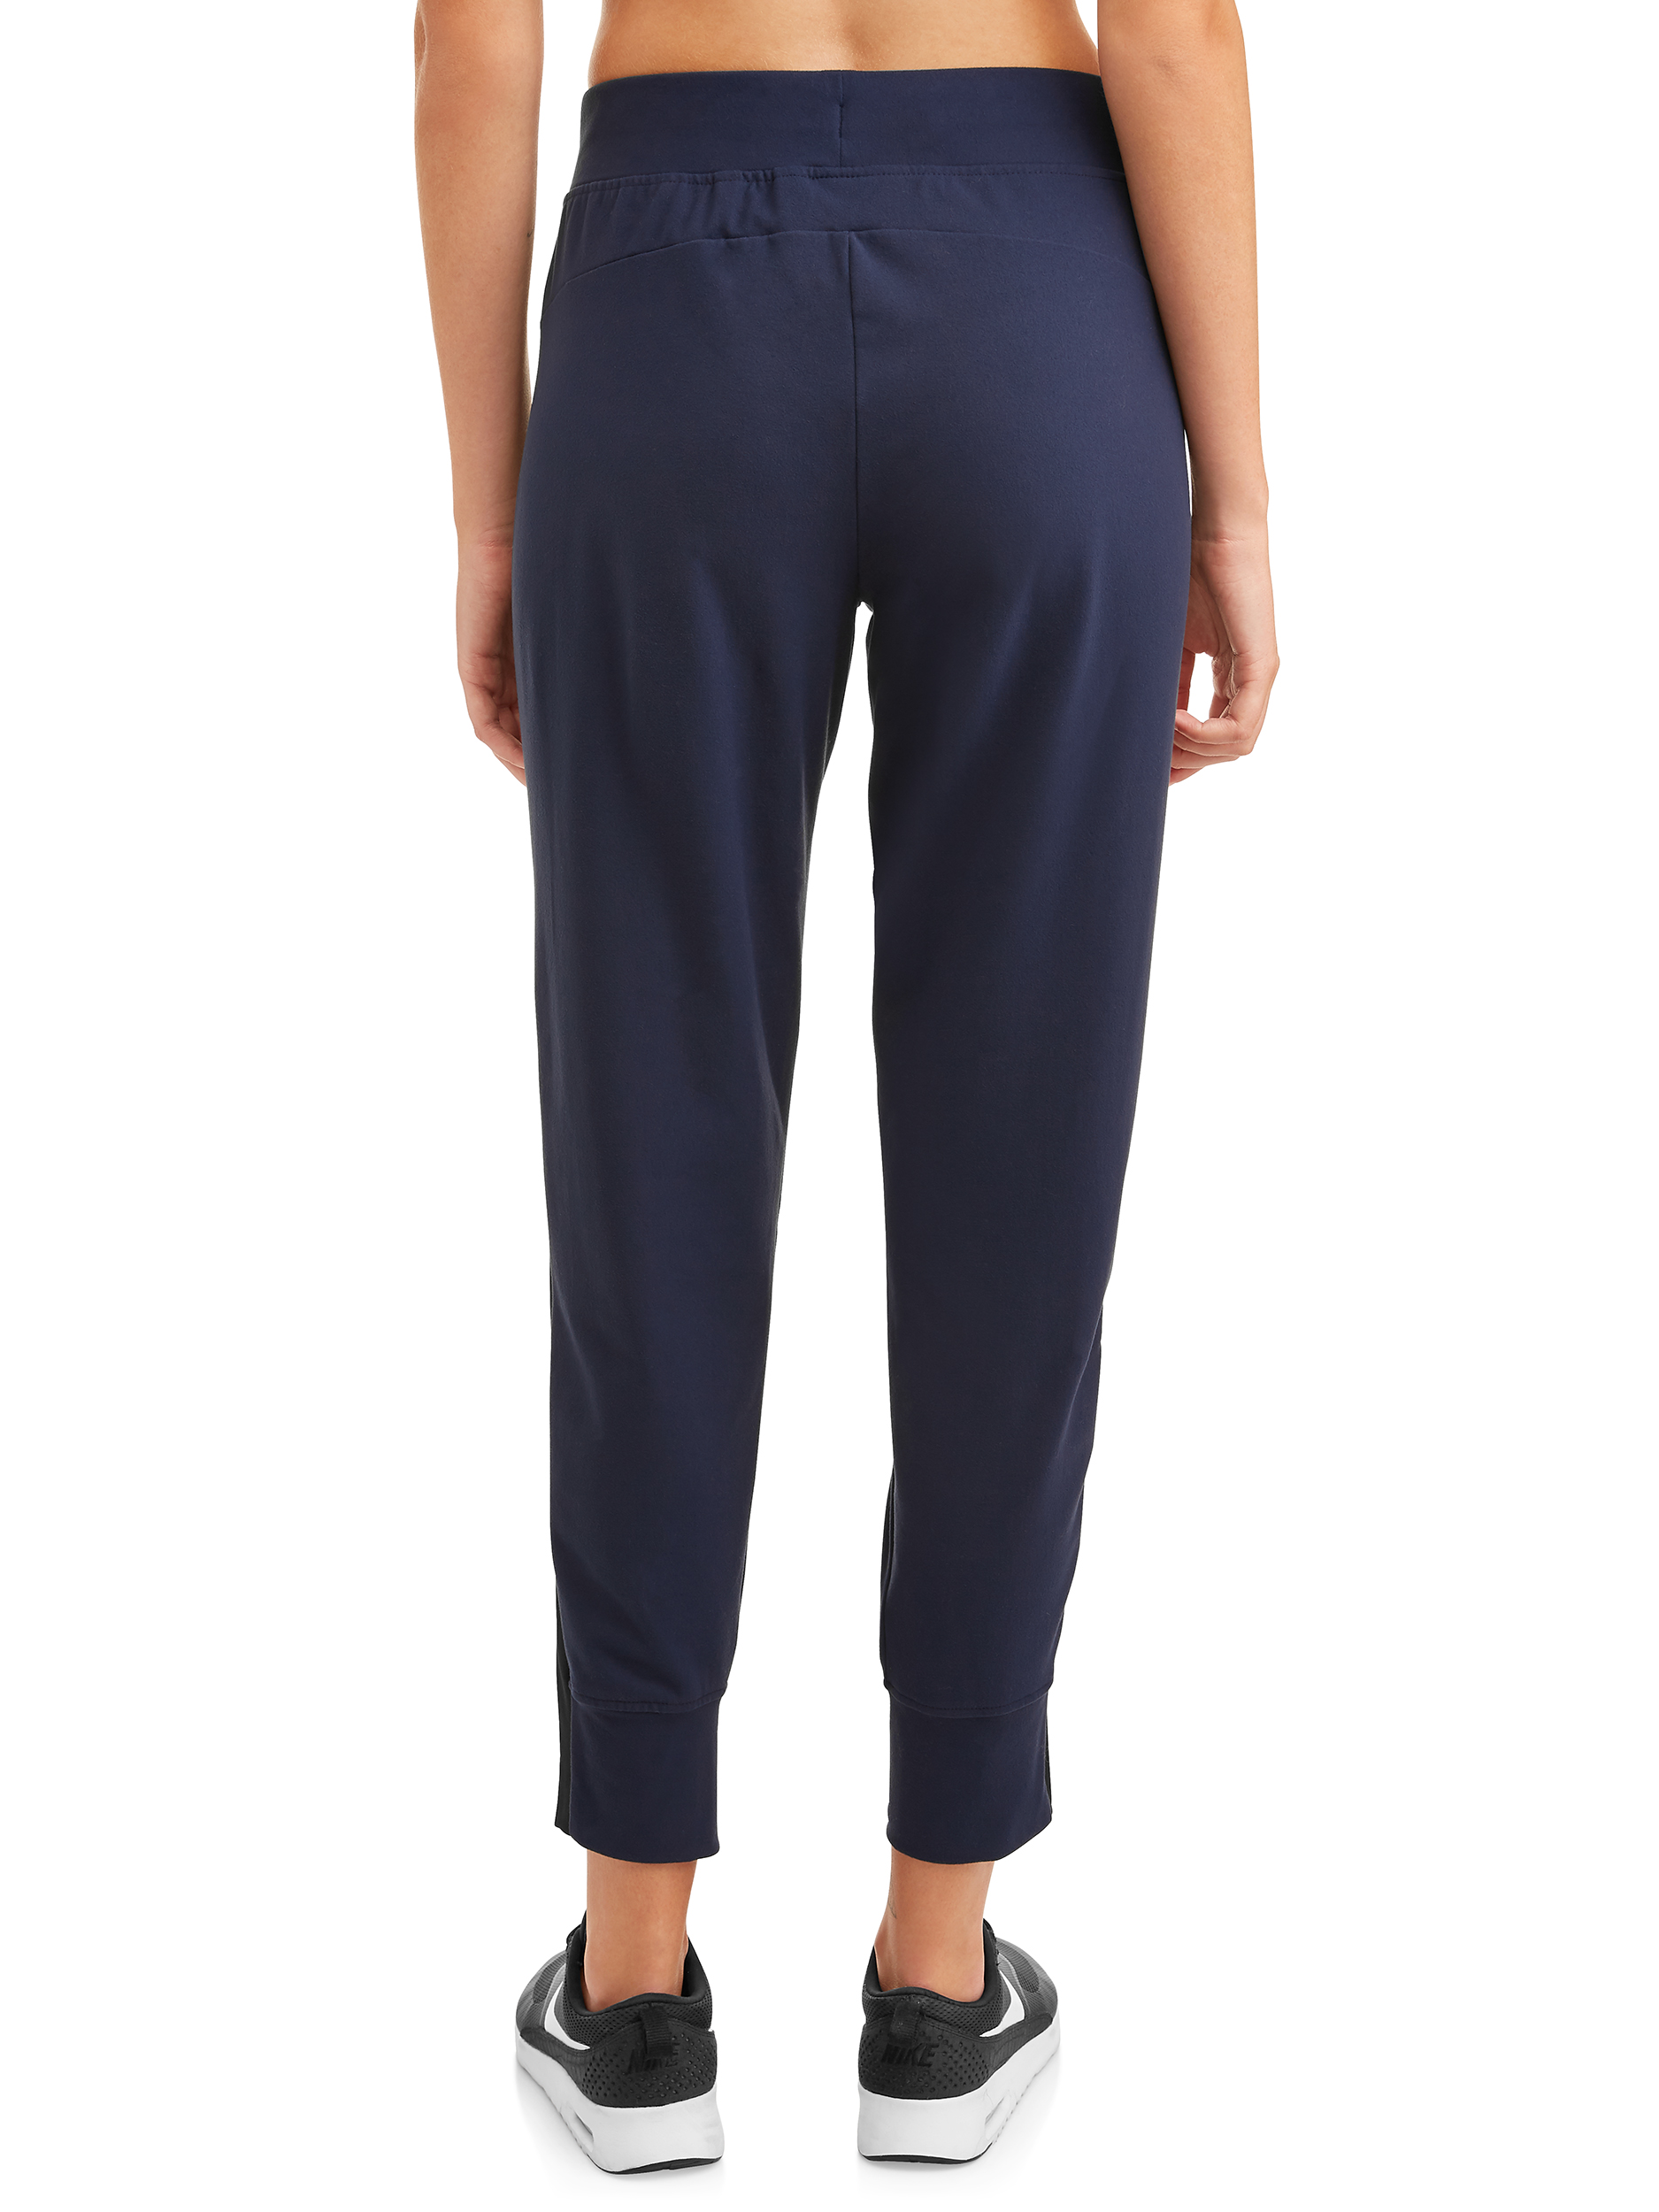 Avia Women's Athleisure Jogger Crop With Side Stripe - image 2 of 4